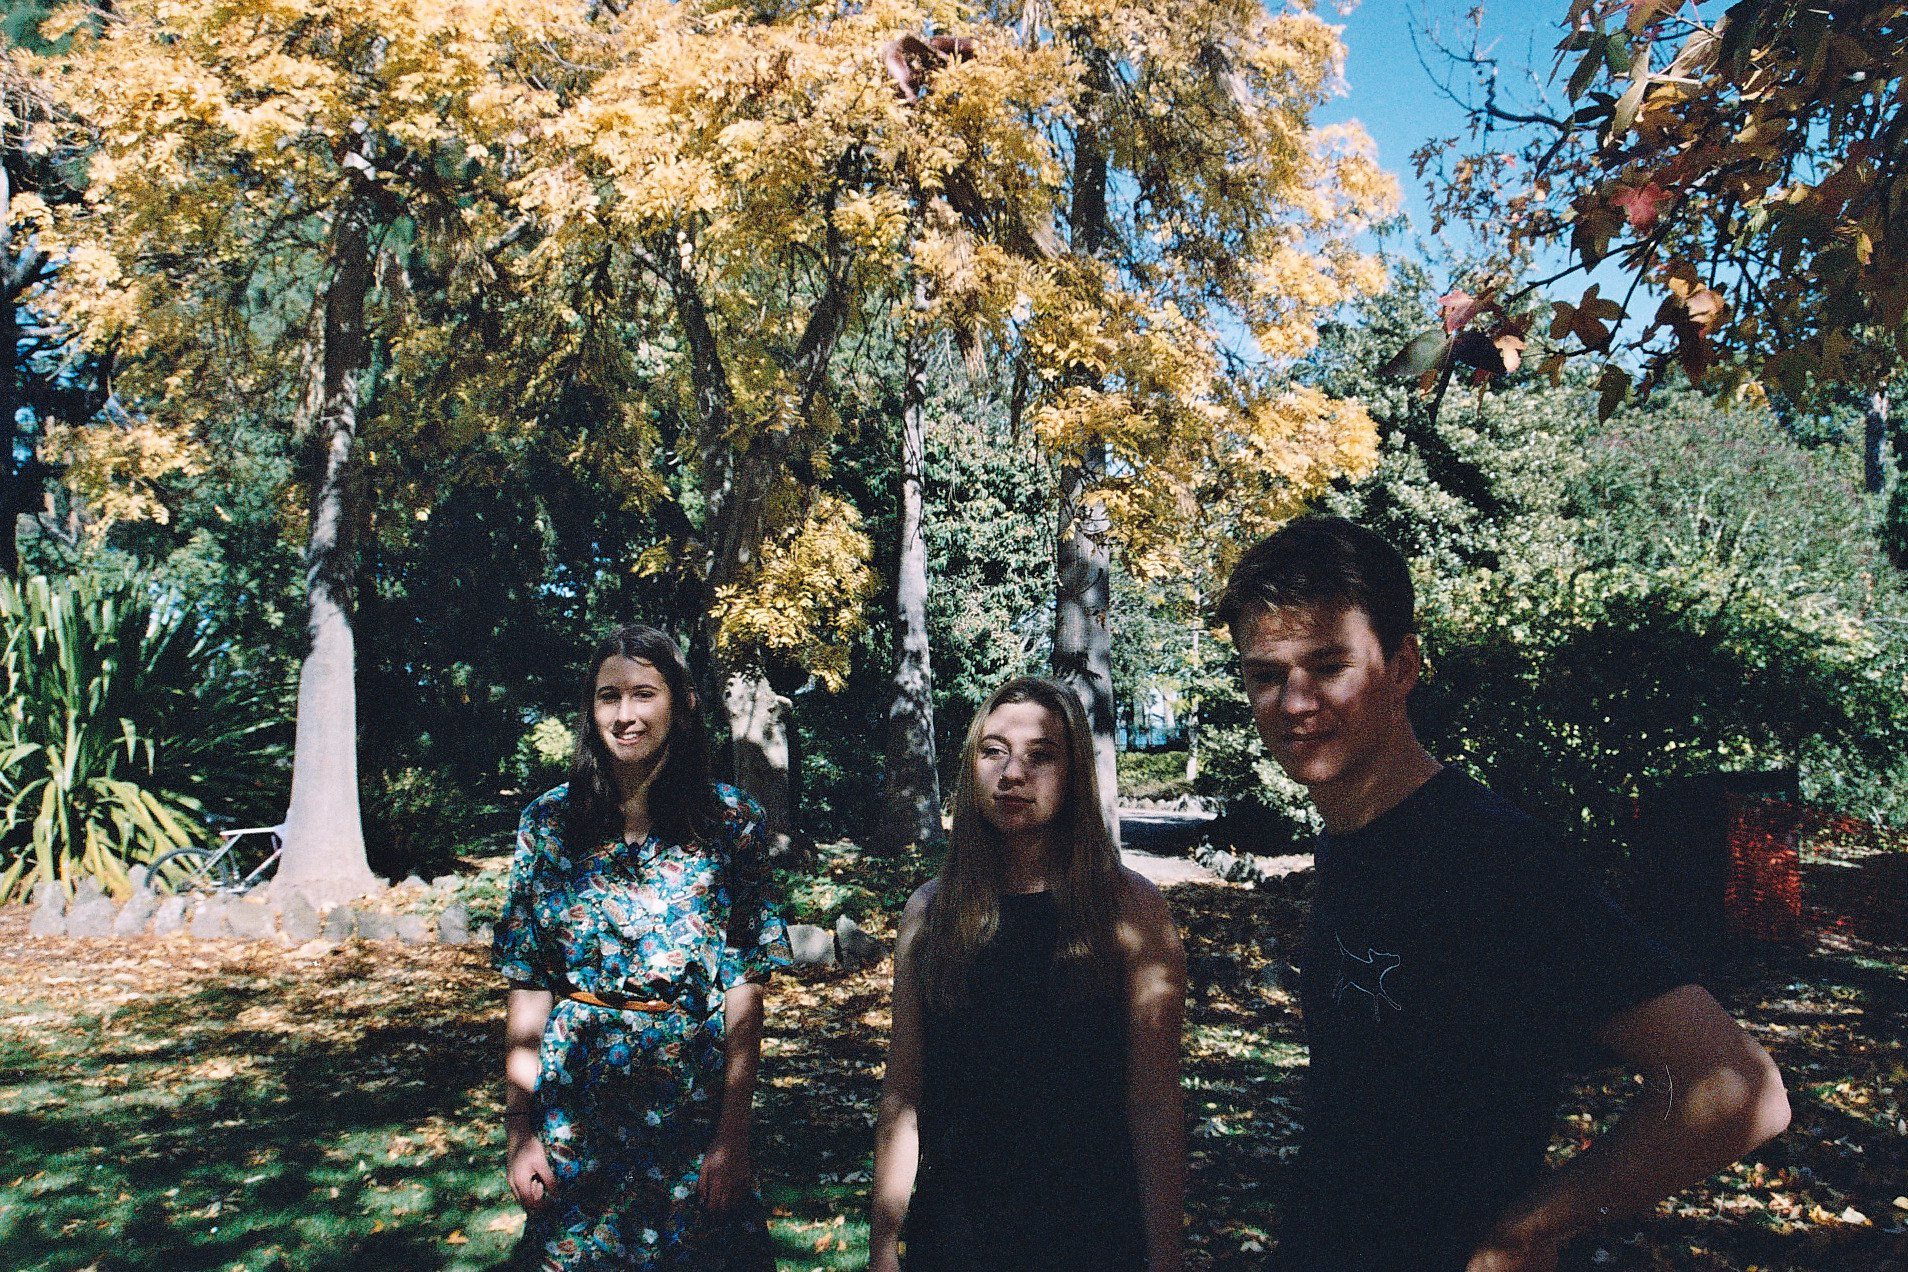 Northern Transmissions' 'Song of the Day' is "Beach Side" by Australian dream pop trio Arbes.